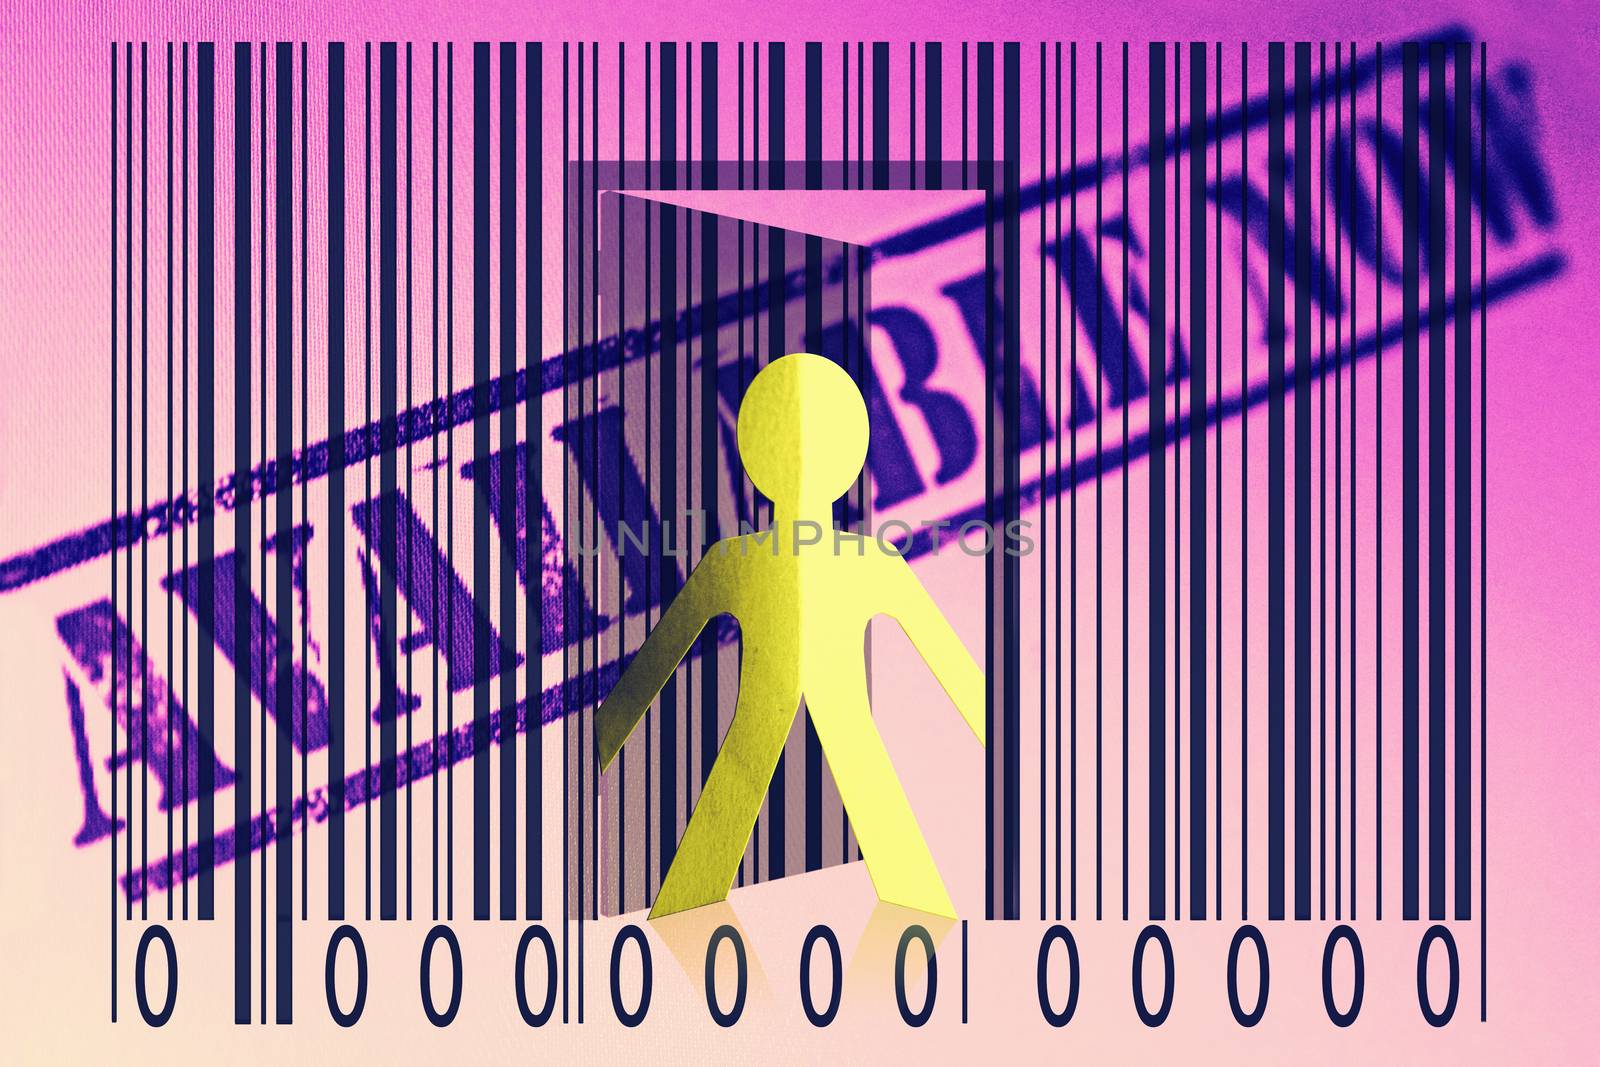 Paperman coming out of a bar code with Available Now Words